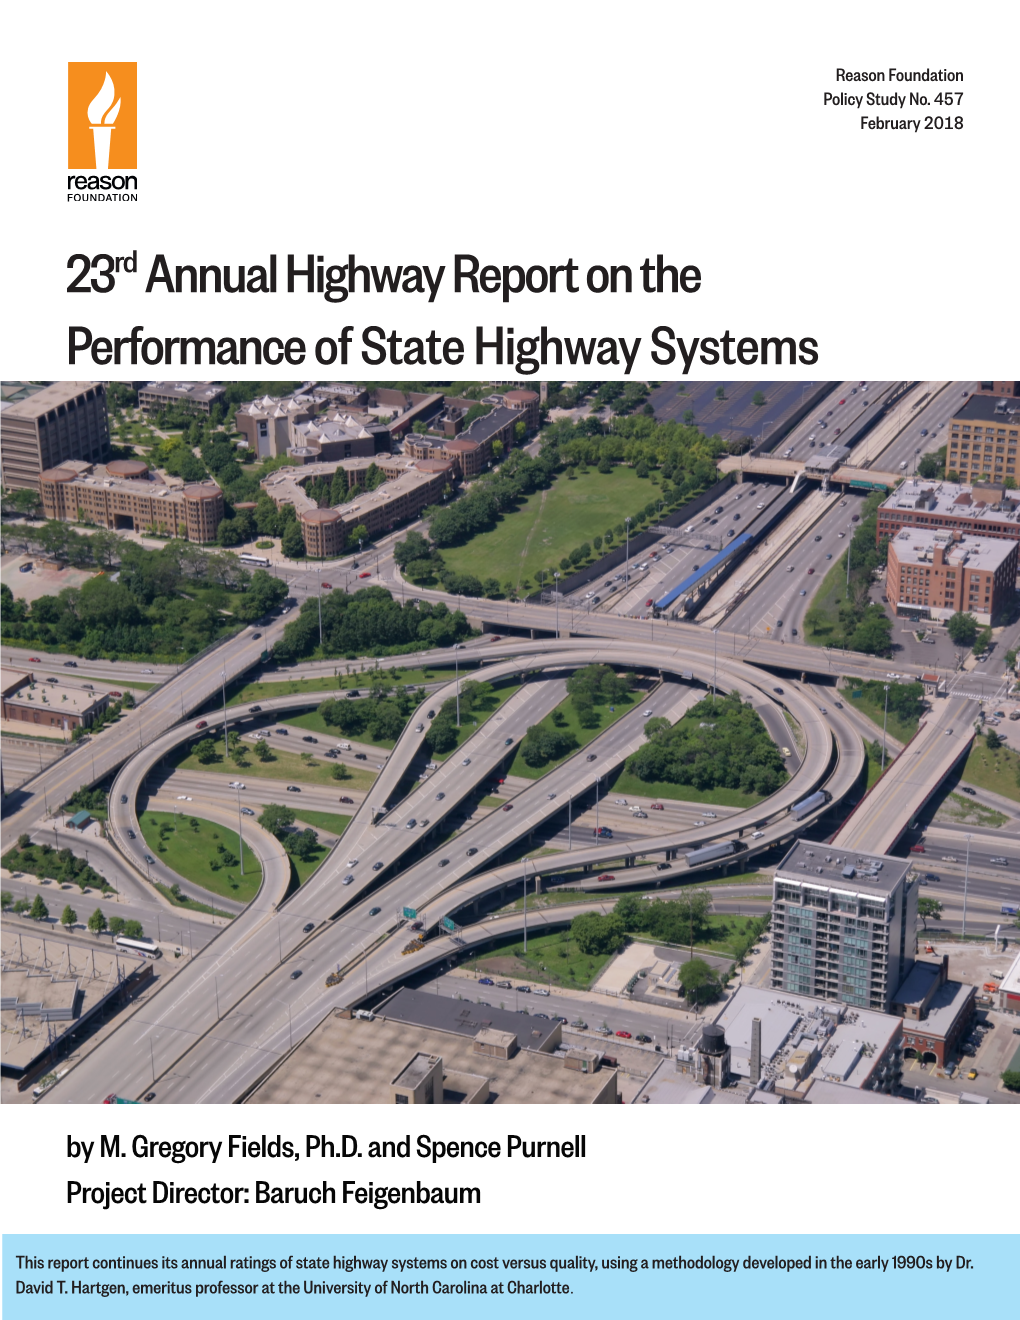 23Rd Annual Highway Report on the Performance of State Highway Systems